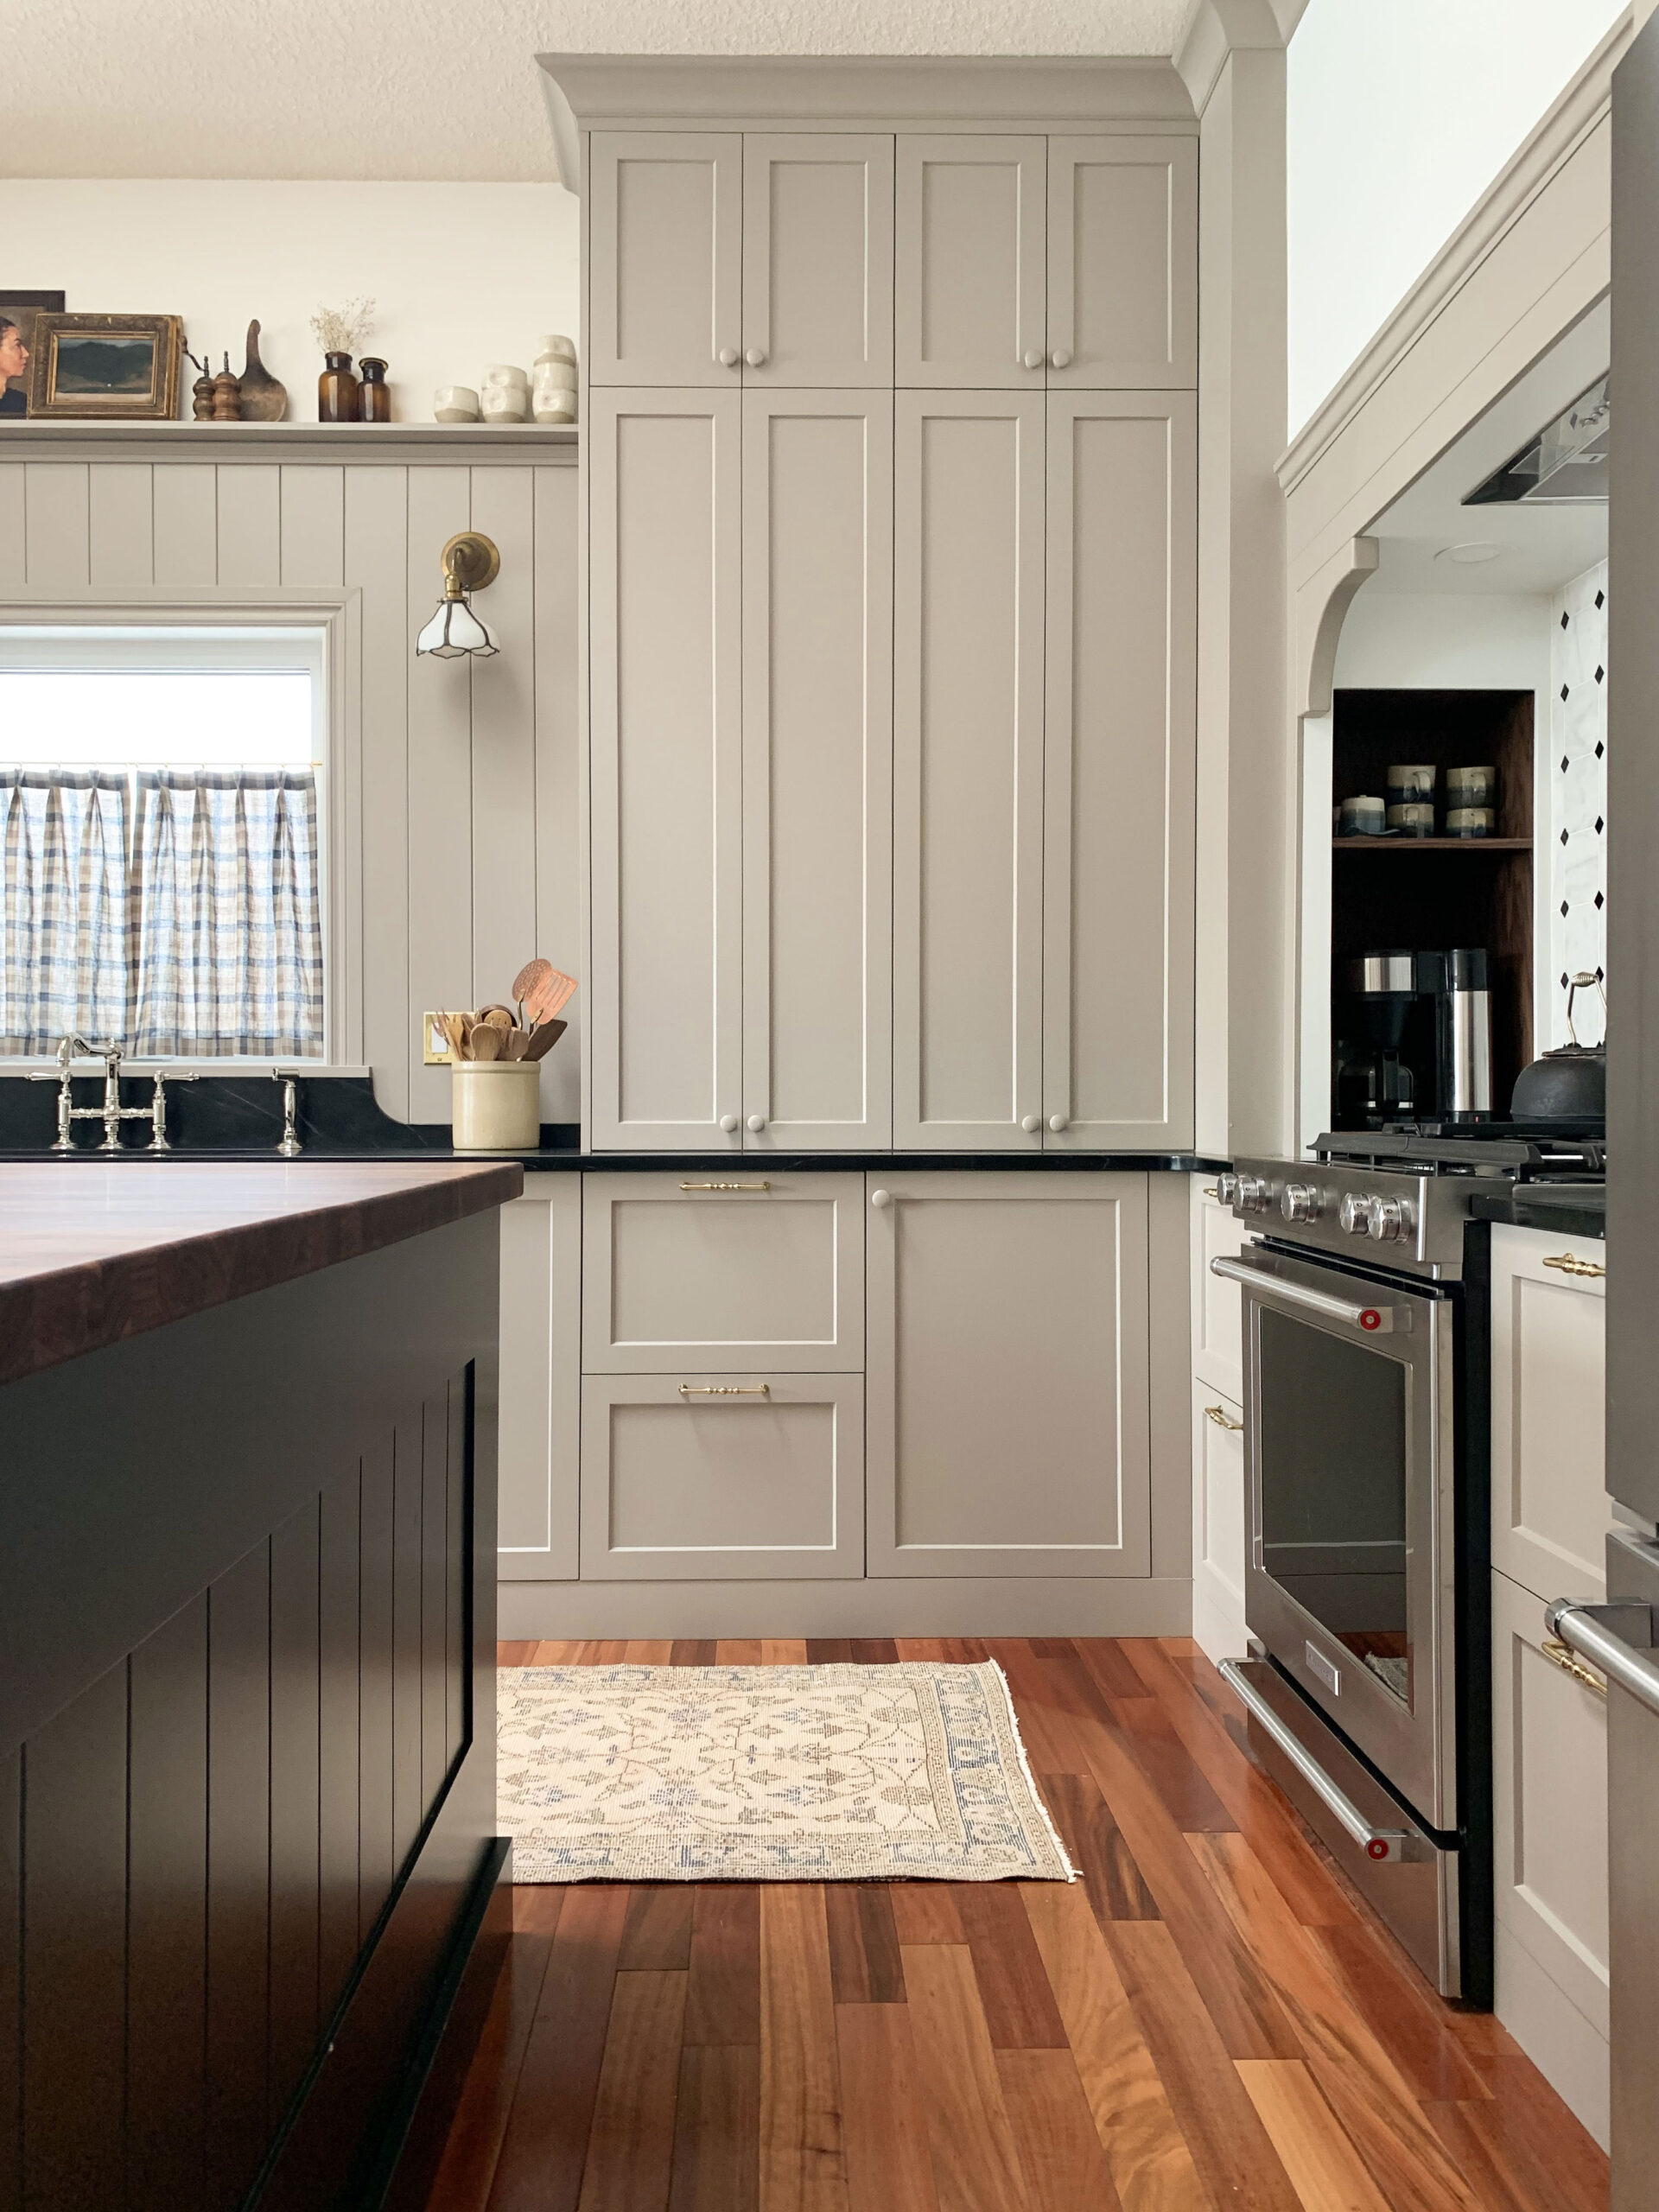 Kitchen corner cabinets – 10 stylish ideas to maximize your space